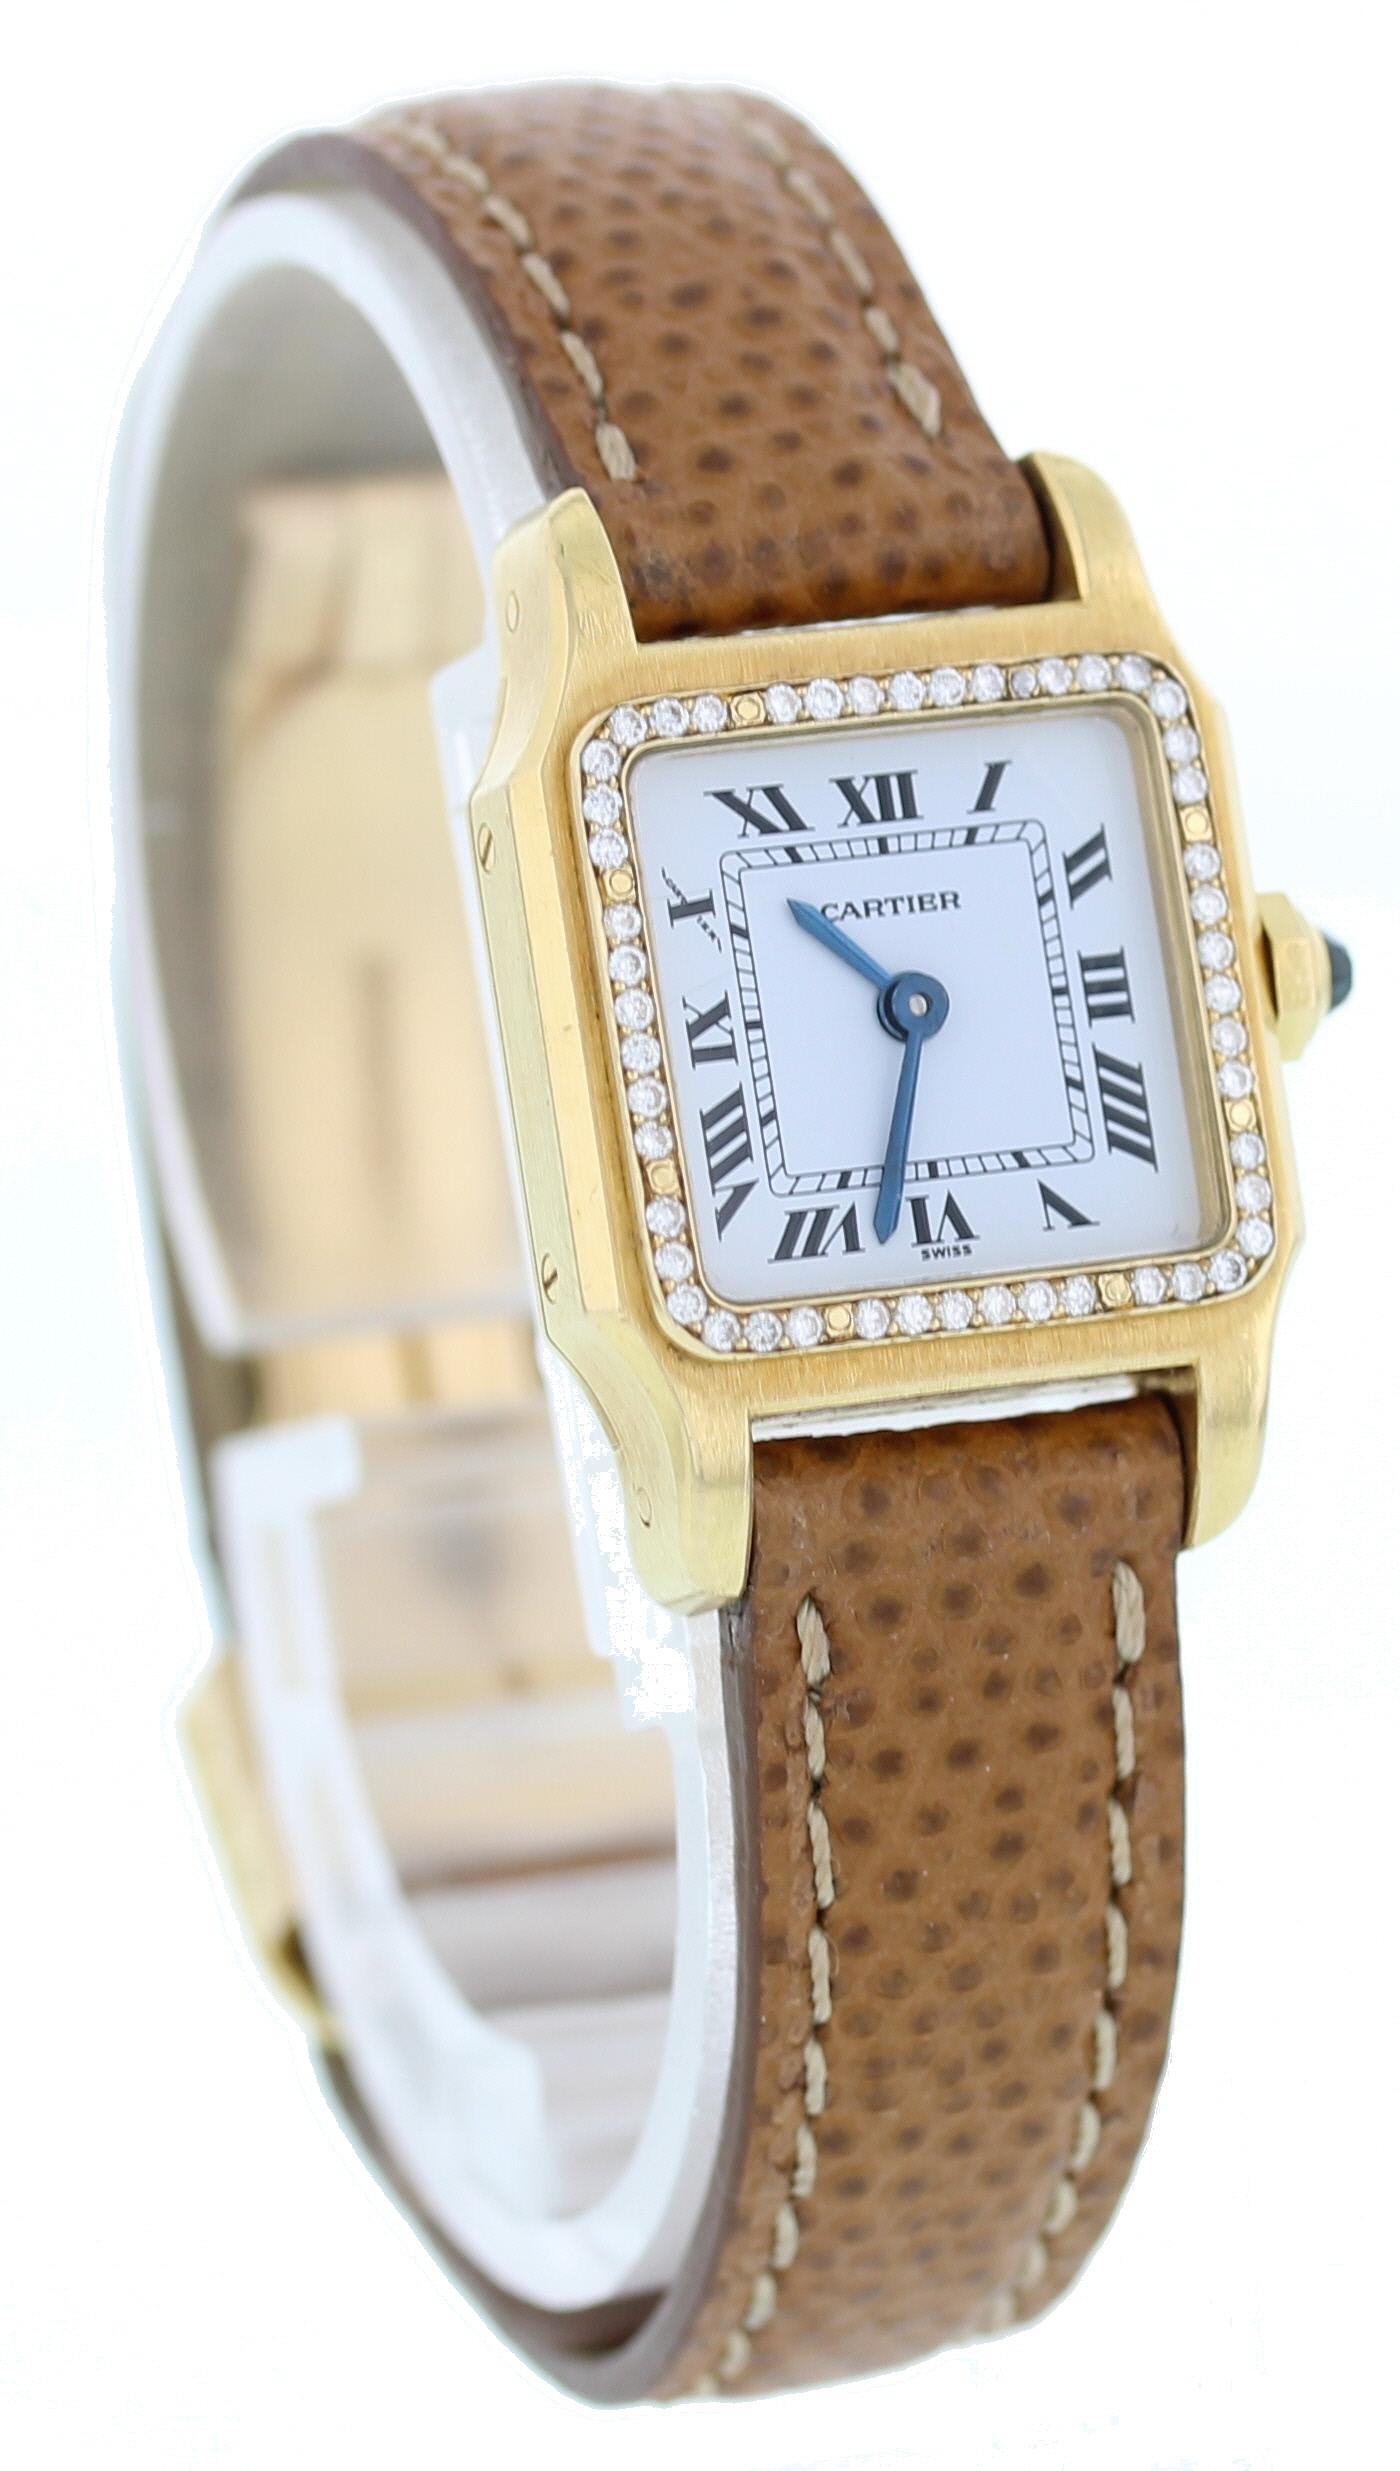 Cartier Paris Santos. 18k Yellow Gold 20mm case. 18k yellow gold bezel with custom set diamonds. White dial with blue hands and Roman numeral markers. Brown leather Cartier strap with an 18k yellow gold deployment clasp. Will fit 6 inch wrist.